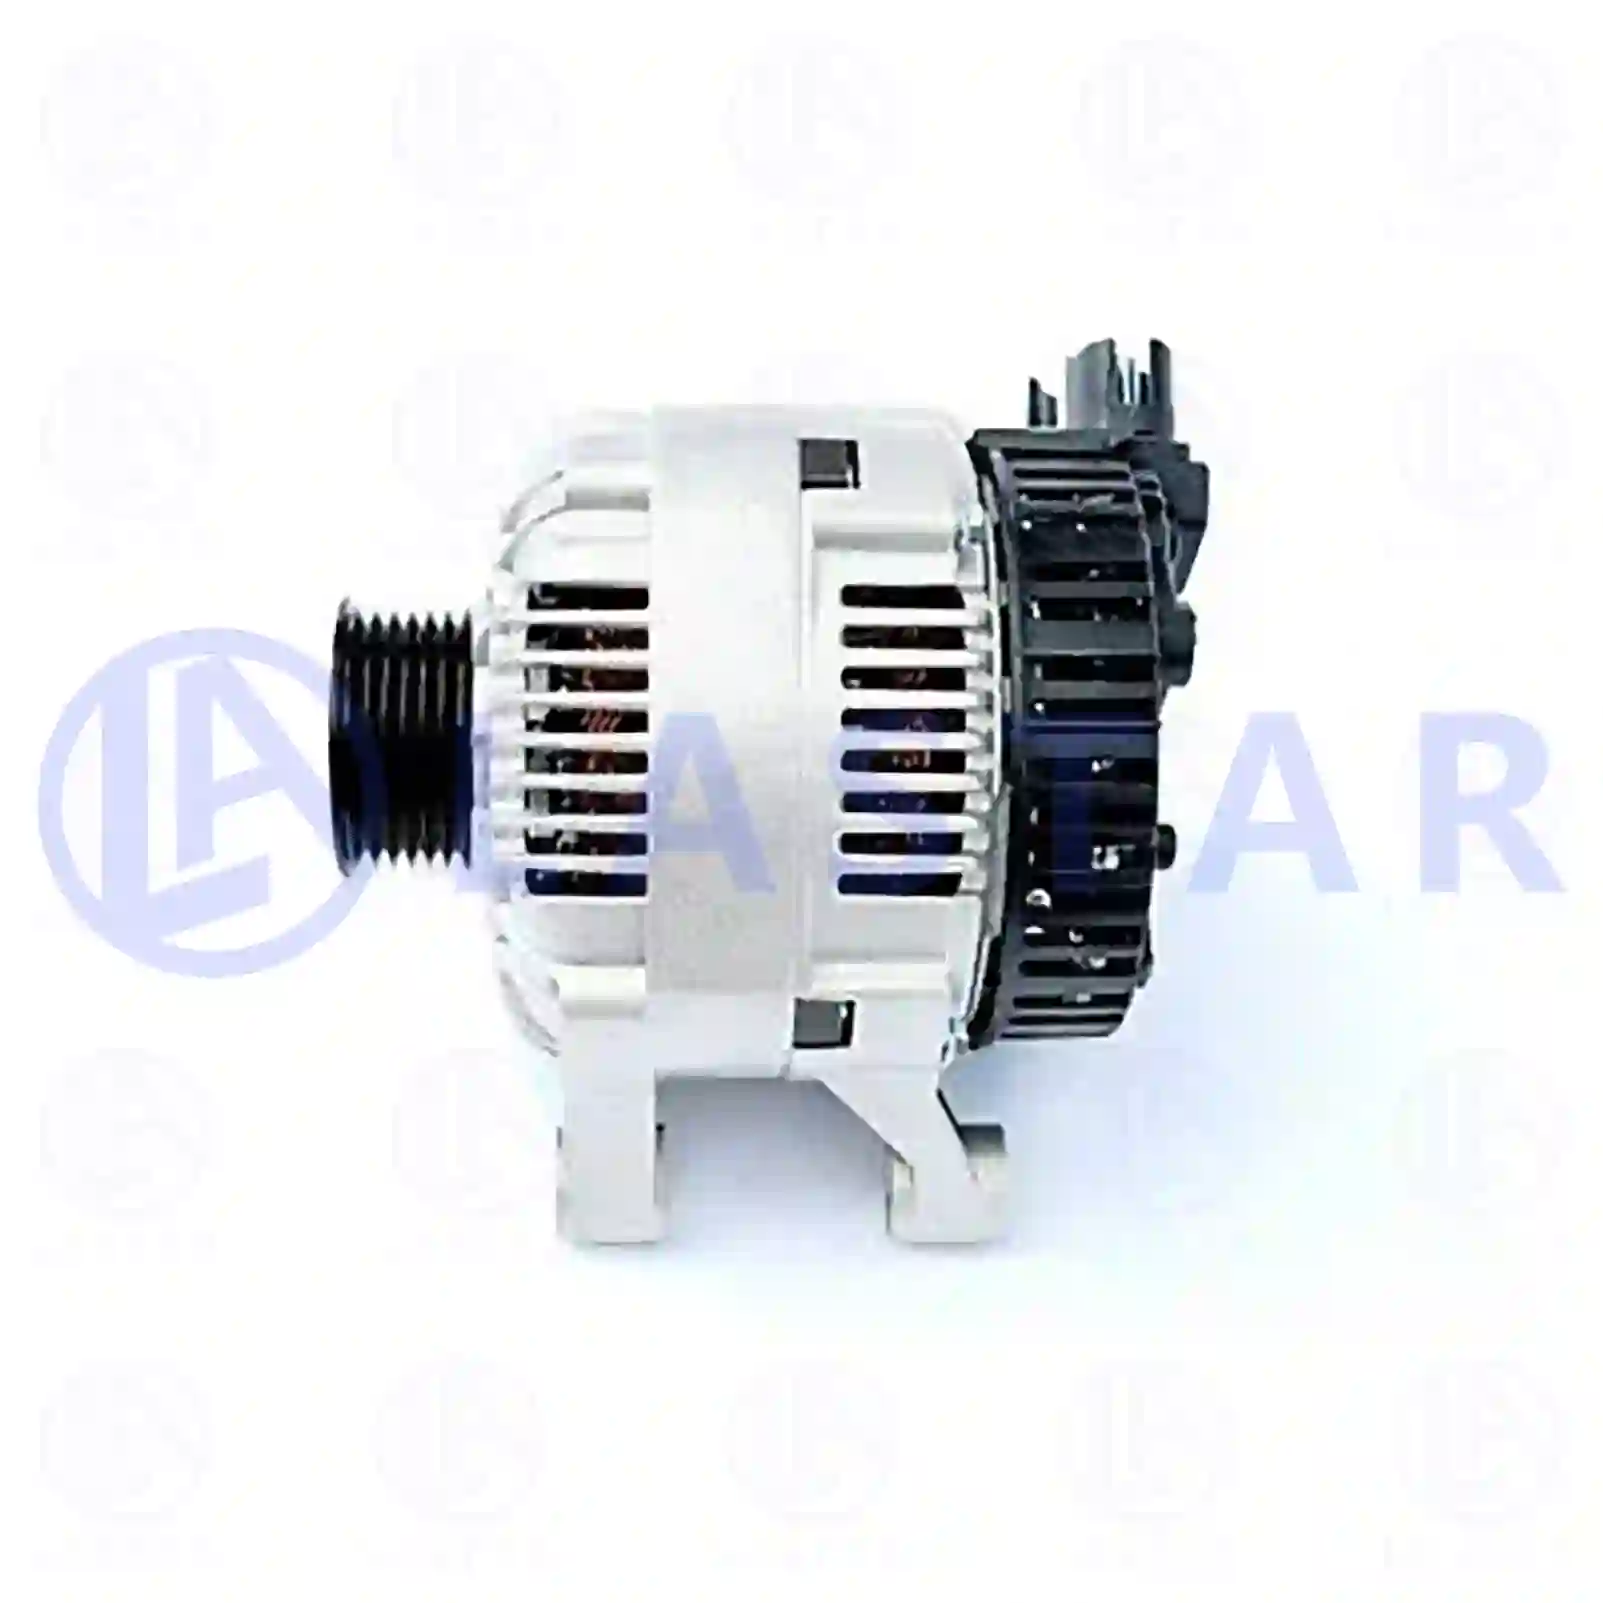 Alternator, 77710017, 57052A, 57052B, 57052C, 57054R, 57054U, 57054W, 57054X, 5705FX, 9622410580, 9623727180, 9623727280, 9623727380, 9623727880, 9635772780, 9635772880, 9642880480, 71716609, 71718905, 71716608, 71716609, 71718905, 9621791680, 9622410580, 9623727380, 9623727880, 9635772880, 9642880480, 71716609, 71718905, 9622410580, SA178, 57052A, 57052B, 57052C, 57054R, 57054U, 57054W, 57054X, 5705FX, 9622410580, 9623727180, 9623727280, 9623727380, 9623727880, 9635772780, 9635772880, 9642880480 ||  77710017 Lastar Spare Part | Truck Spare Parts, Auotomotive Spare Parts Alternator, 77710017, 57052A, 57052B, 57052C, 57054R, 57054U, 57054W, 57054X, 5705FX, 9622410580, 9623727180, 9623727280, 9623727380, 9623727880, 9635772780, 9635772880, 9642880480, 71716609, 71718905, 71716608, 71716609, 71718905, 9621791680, 9622410580, 9623727380, 9623727880, 9635772880, 9642880480, 71716609, 71718905, 9622410580, SA178, 57052A, 57052B, 57052C, 57054R, 57054U, 57054W, 57054X, 5705FX, 9622410580, 9623727180, 9623727280, 9623727380, 9623727880, 9635772780, 9635772880, 9642880480 ||  77710017 Lastar Spare Part | Truck Spare Parts, Auotomotive Spare Parts